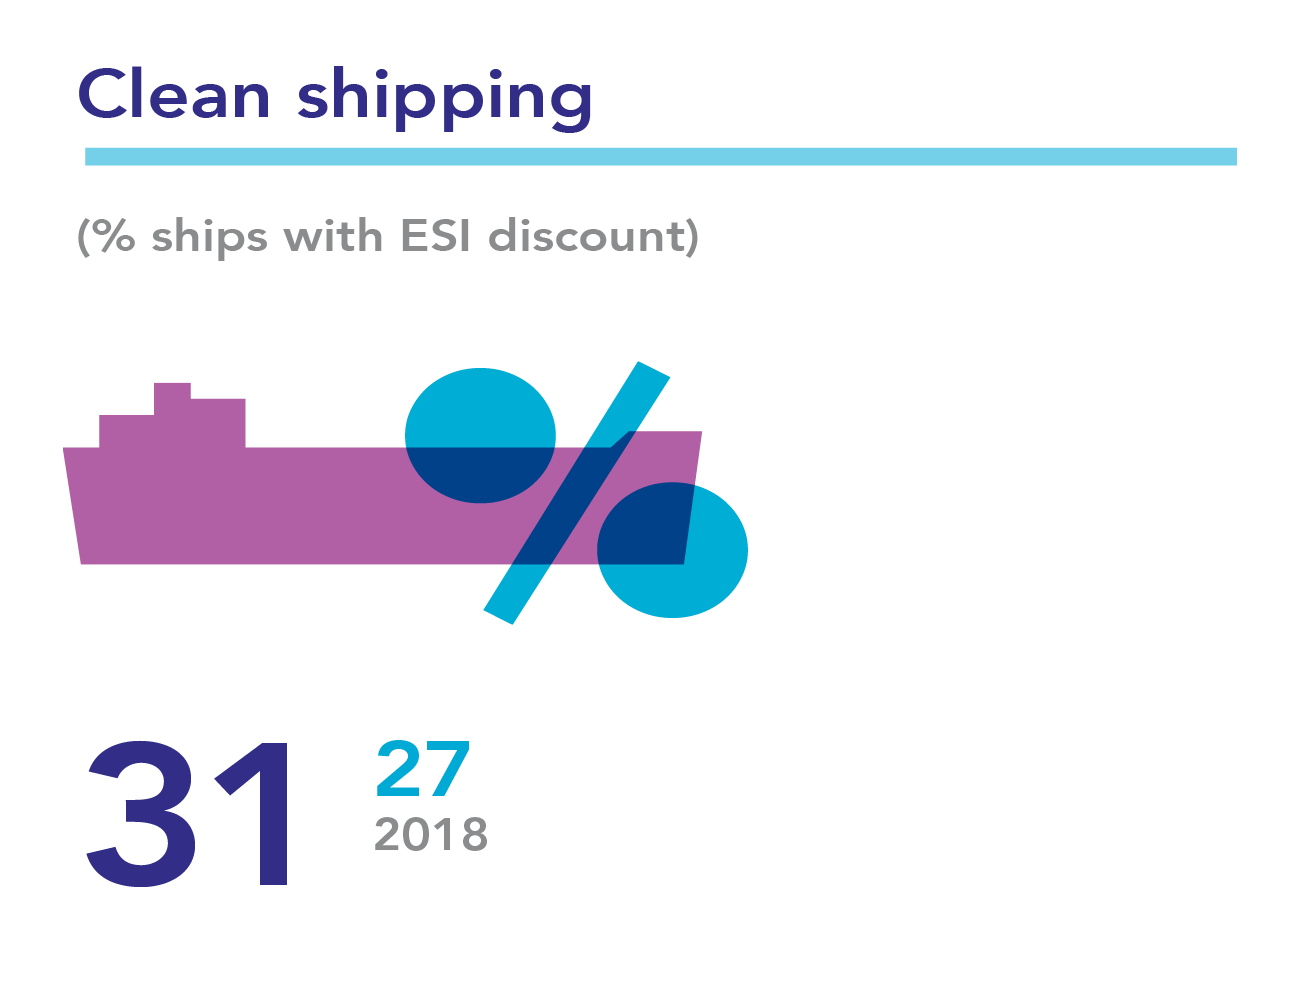 Clean shipping 2019: 31% of ships with ESI discount